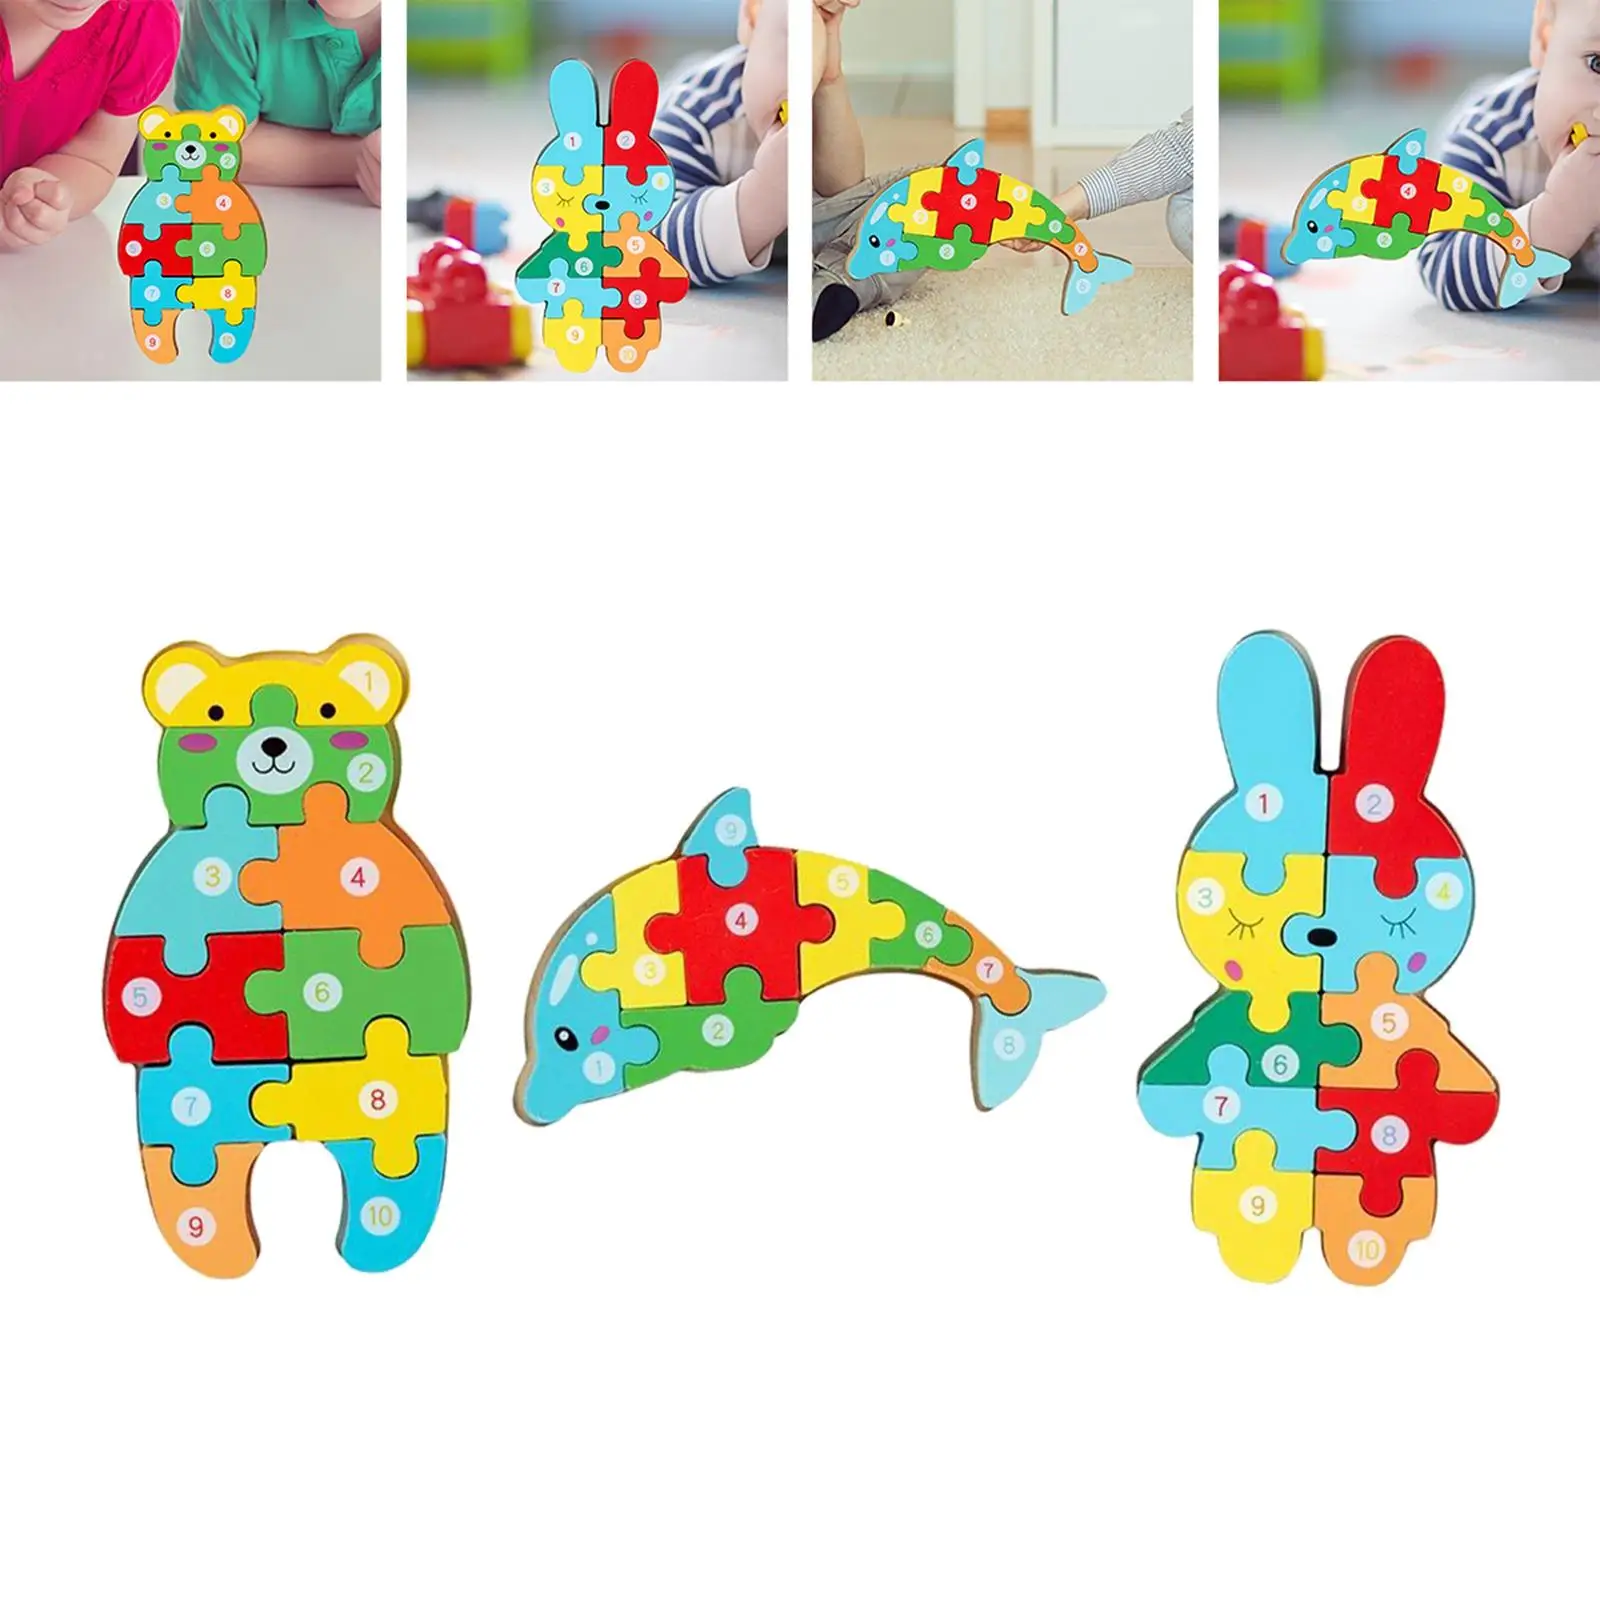 3D Animal Shapes Jigsaw Puzzles Kid Wooden Toy for Child Ages 2-6 Attractive+3D